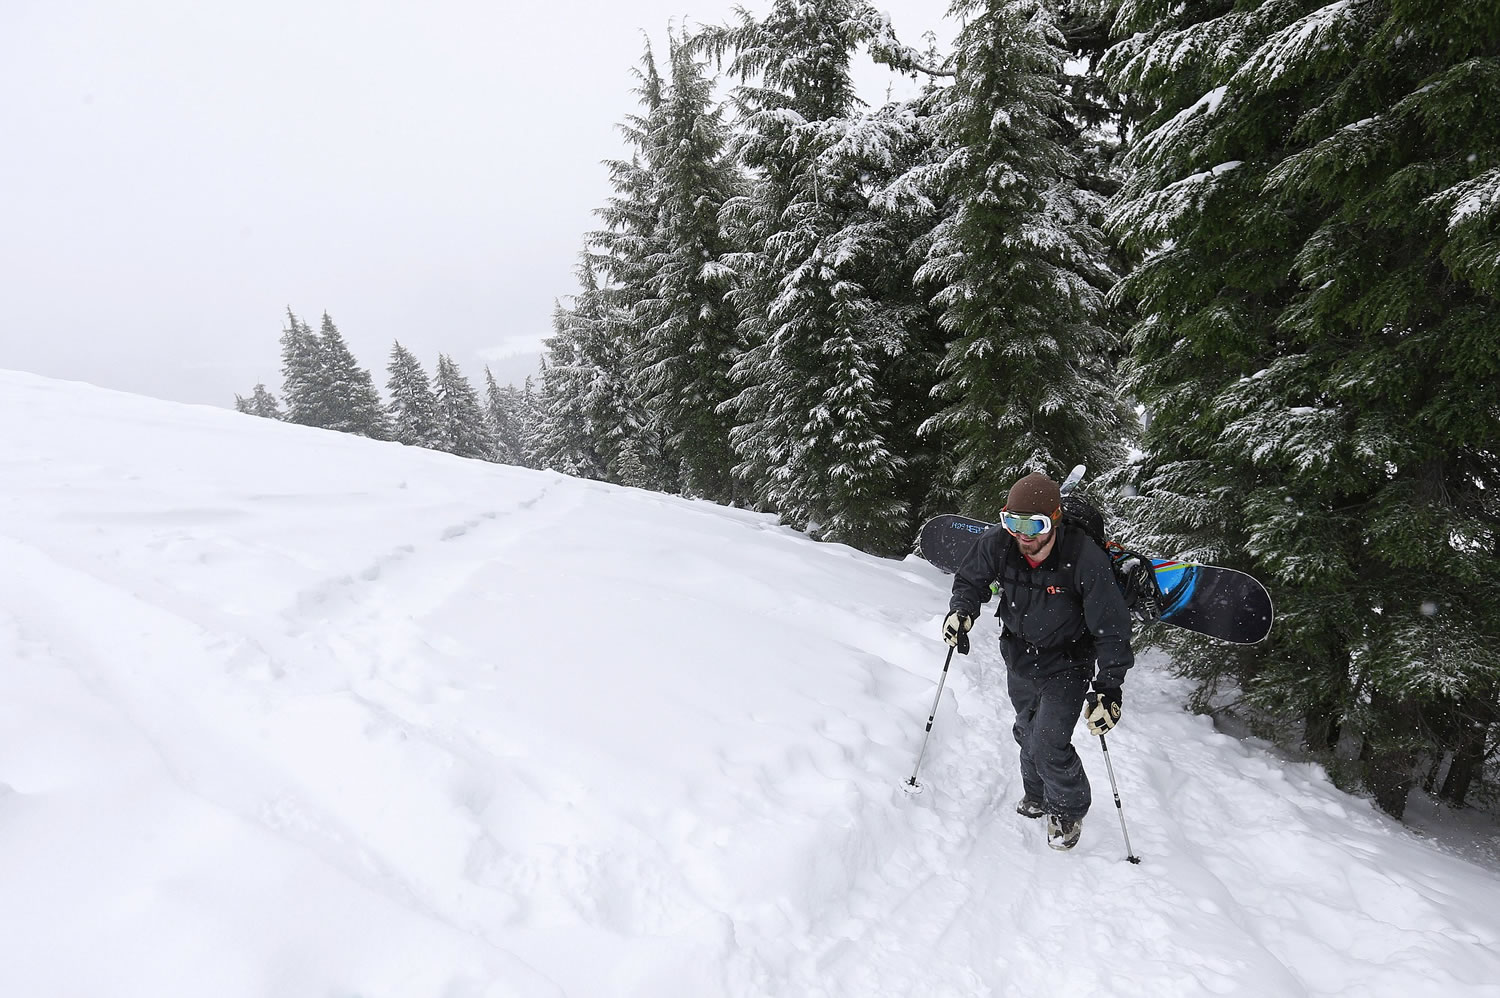 Luke Fortezzo, of Bend, Ore., hikes up the cinder cone to snowboard down at the Mount Bachelor Ski Area about 20 miles west of Bend, Ore., in November.